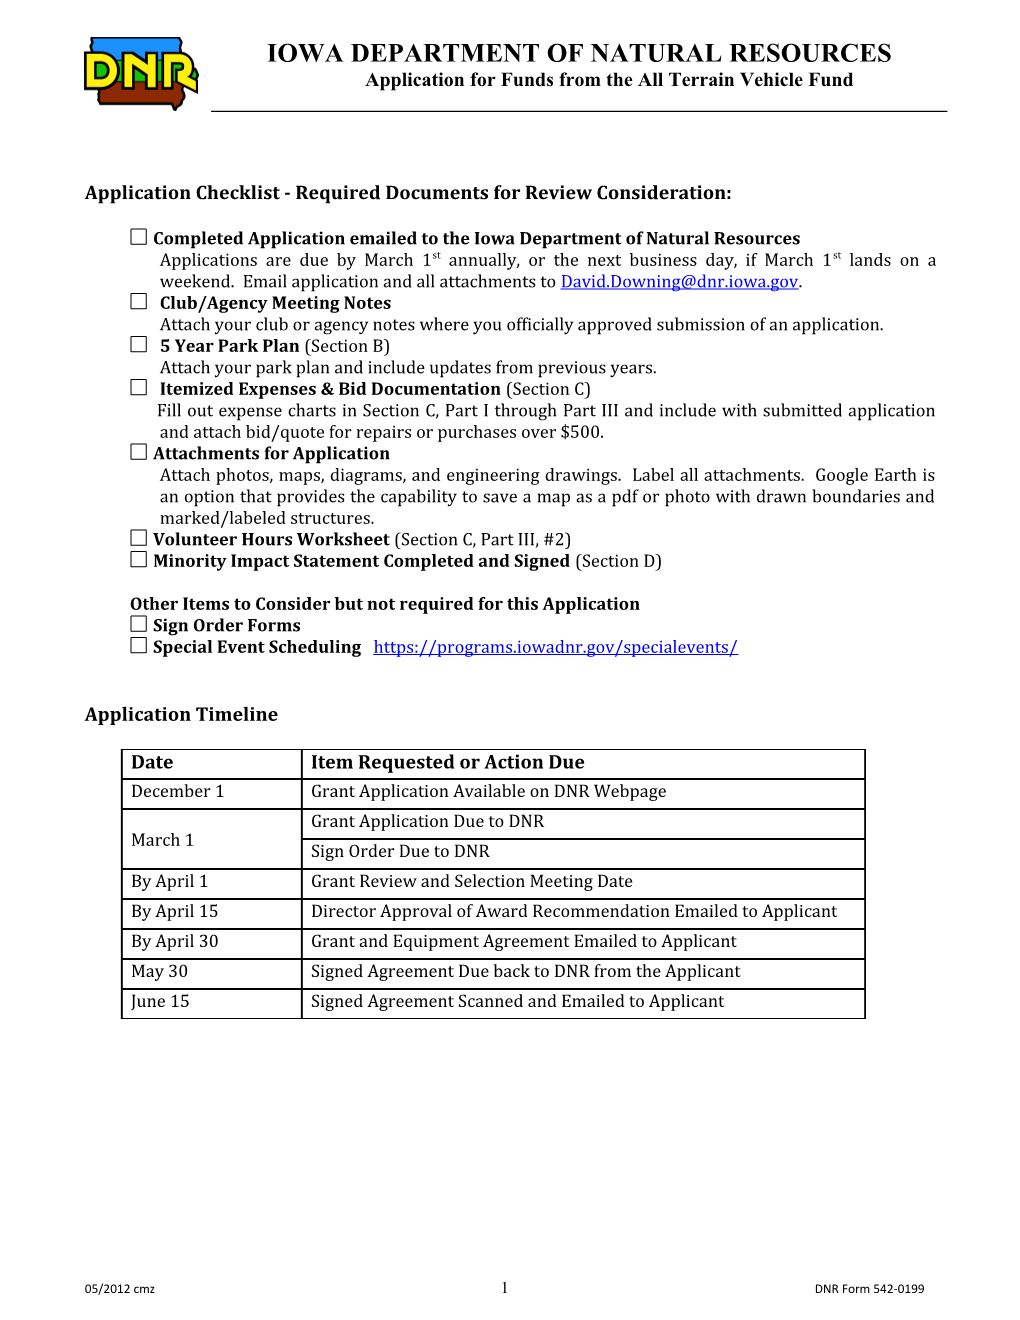 Application Checklist - Required Documents for Review Consideration